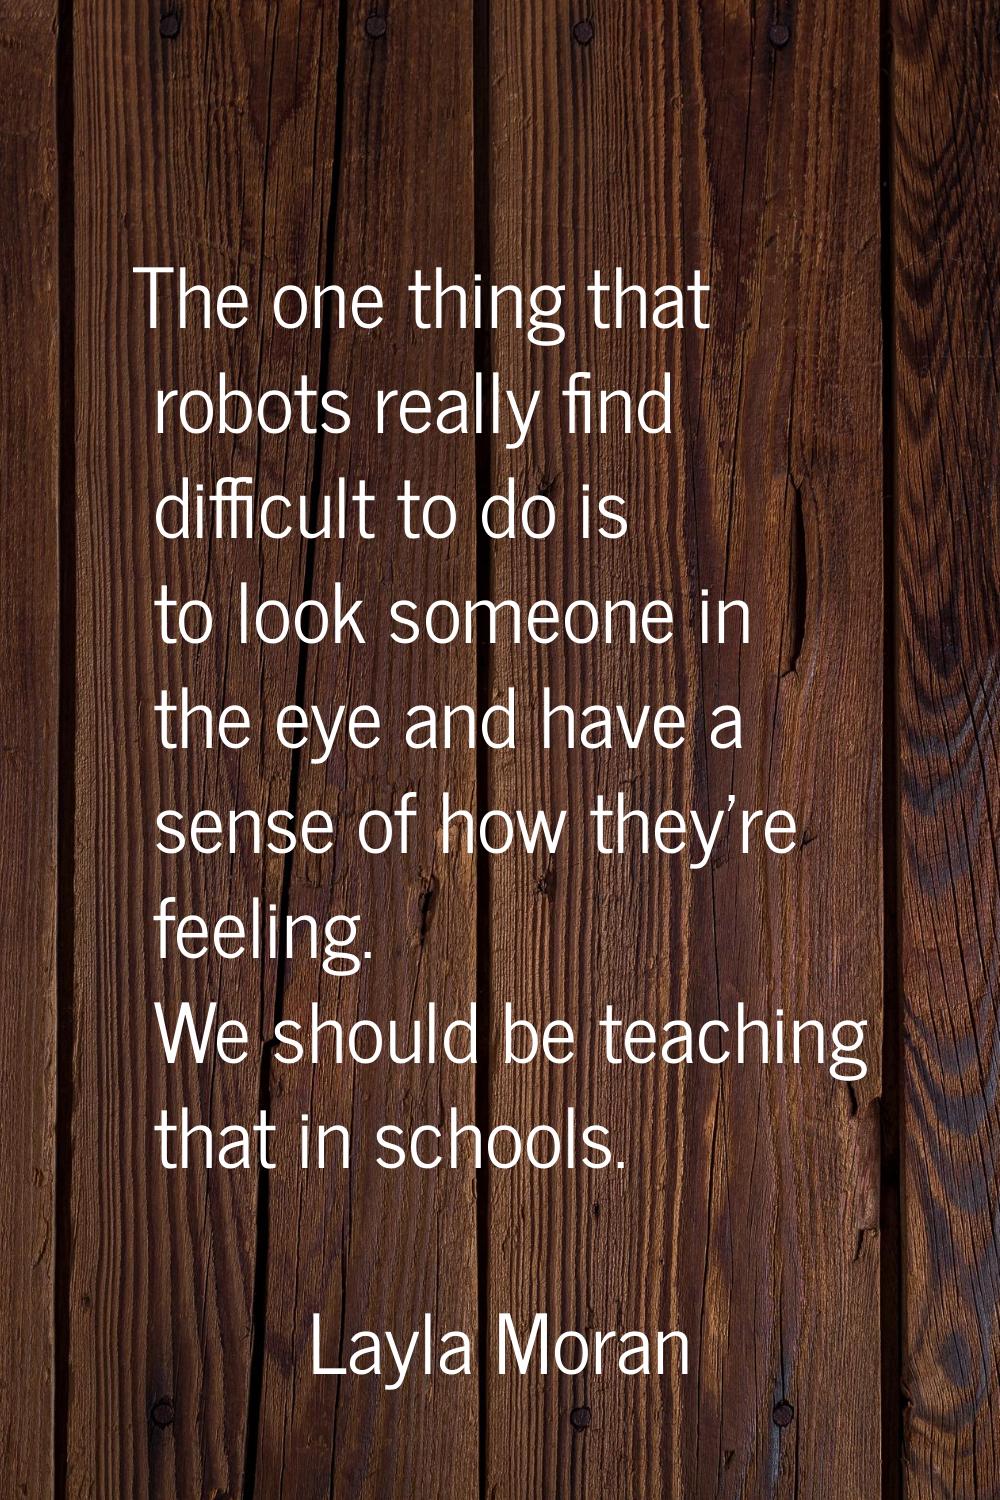 The one thing that robots really find difficult to do is to look someone in the eye and have a sens